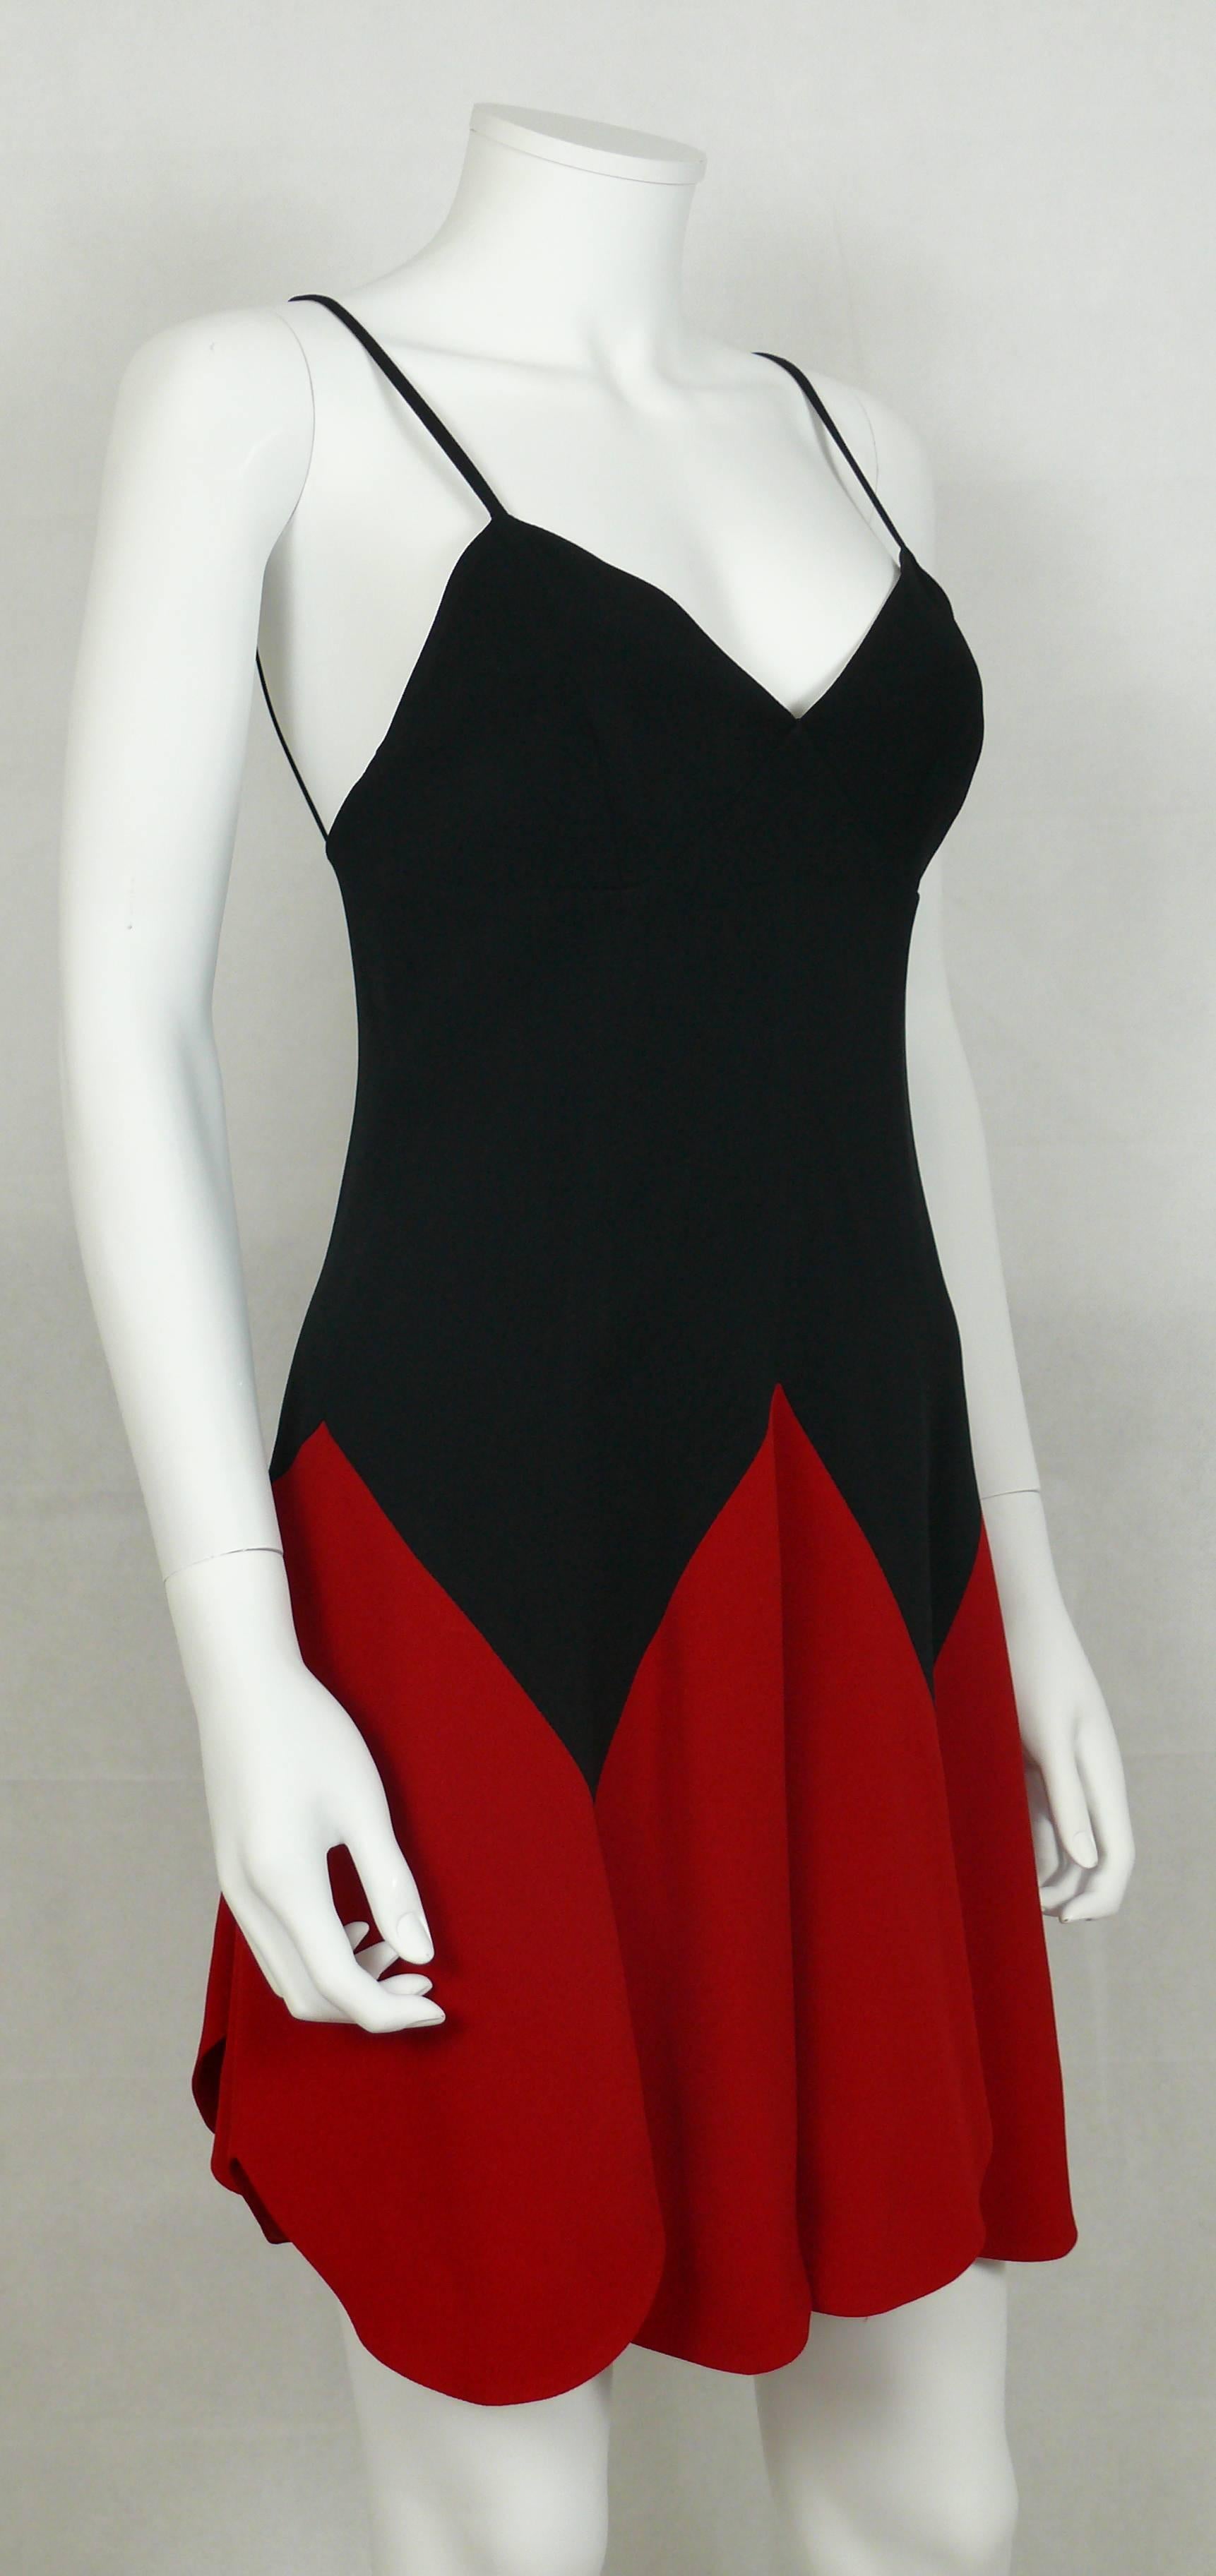 MOSCHINO 1990s vintage iconic heart mini dress.

Fitted cut.

Spaghetti straps.

Side zip closure.

Label reads CHEAP AND CHIC by MOSCHINO Made in Italy. 

Marked Size : I 42 / D 38 / F 38 / GB 10 / USA 8.
Please double check